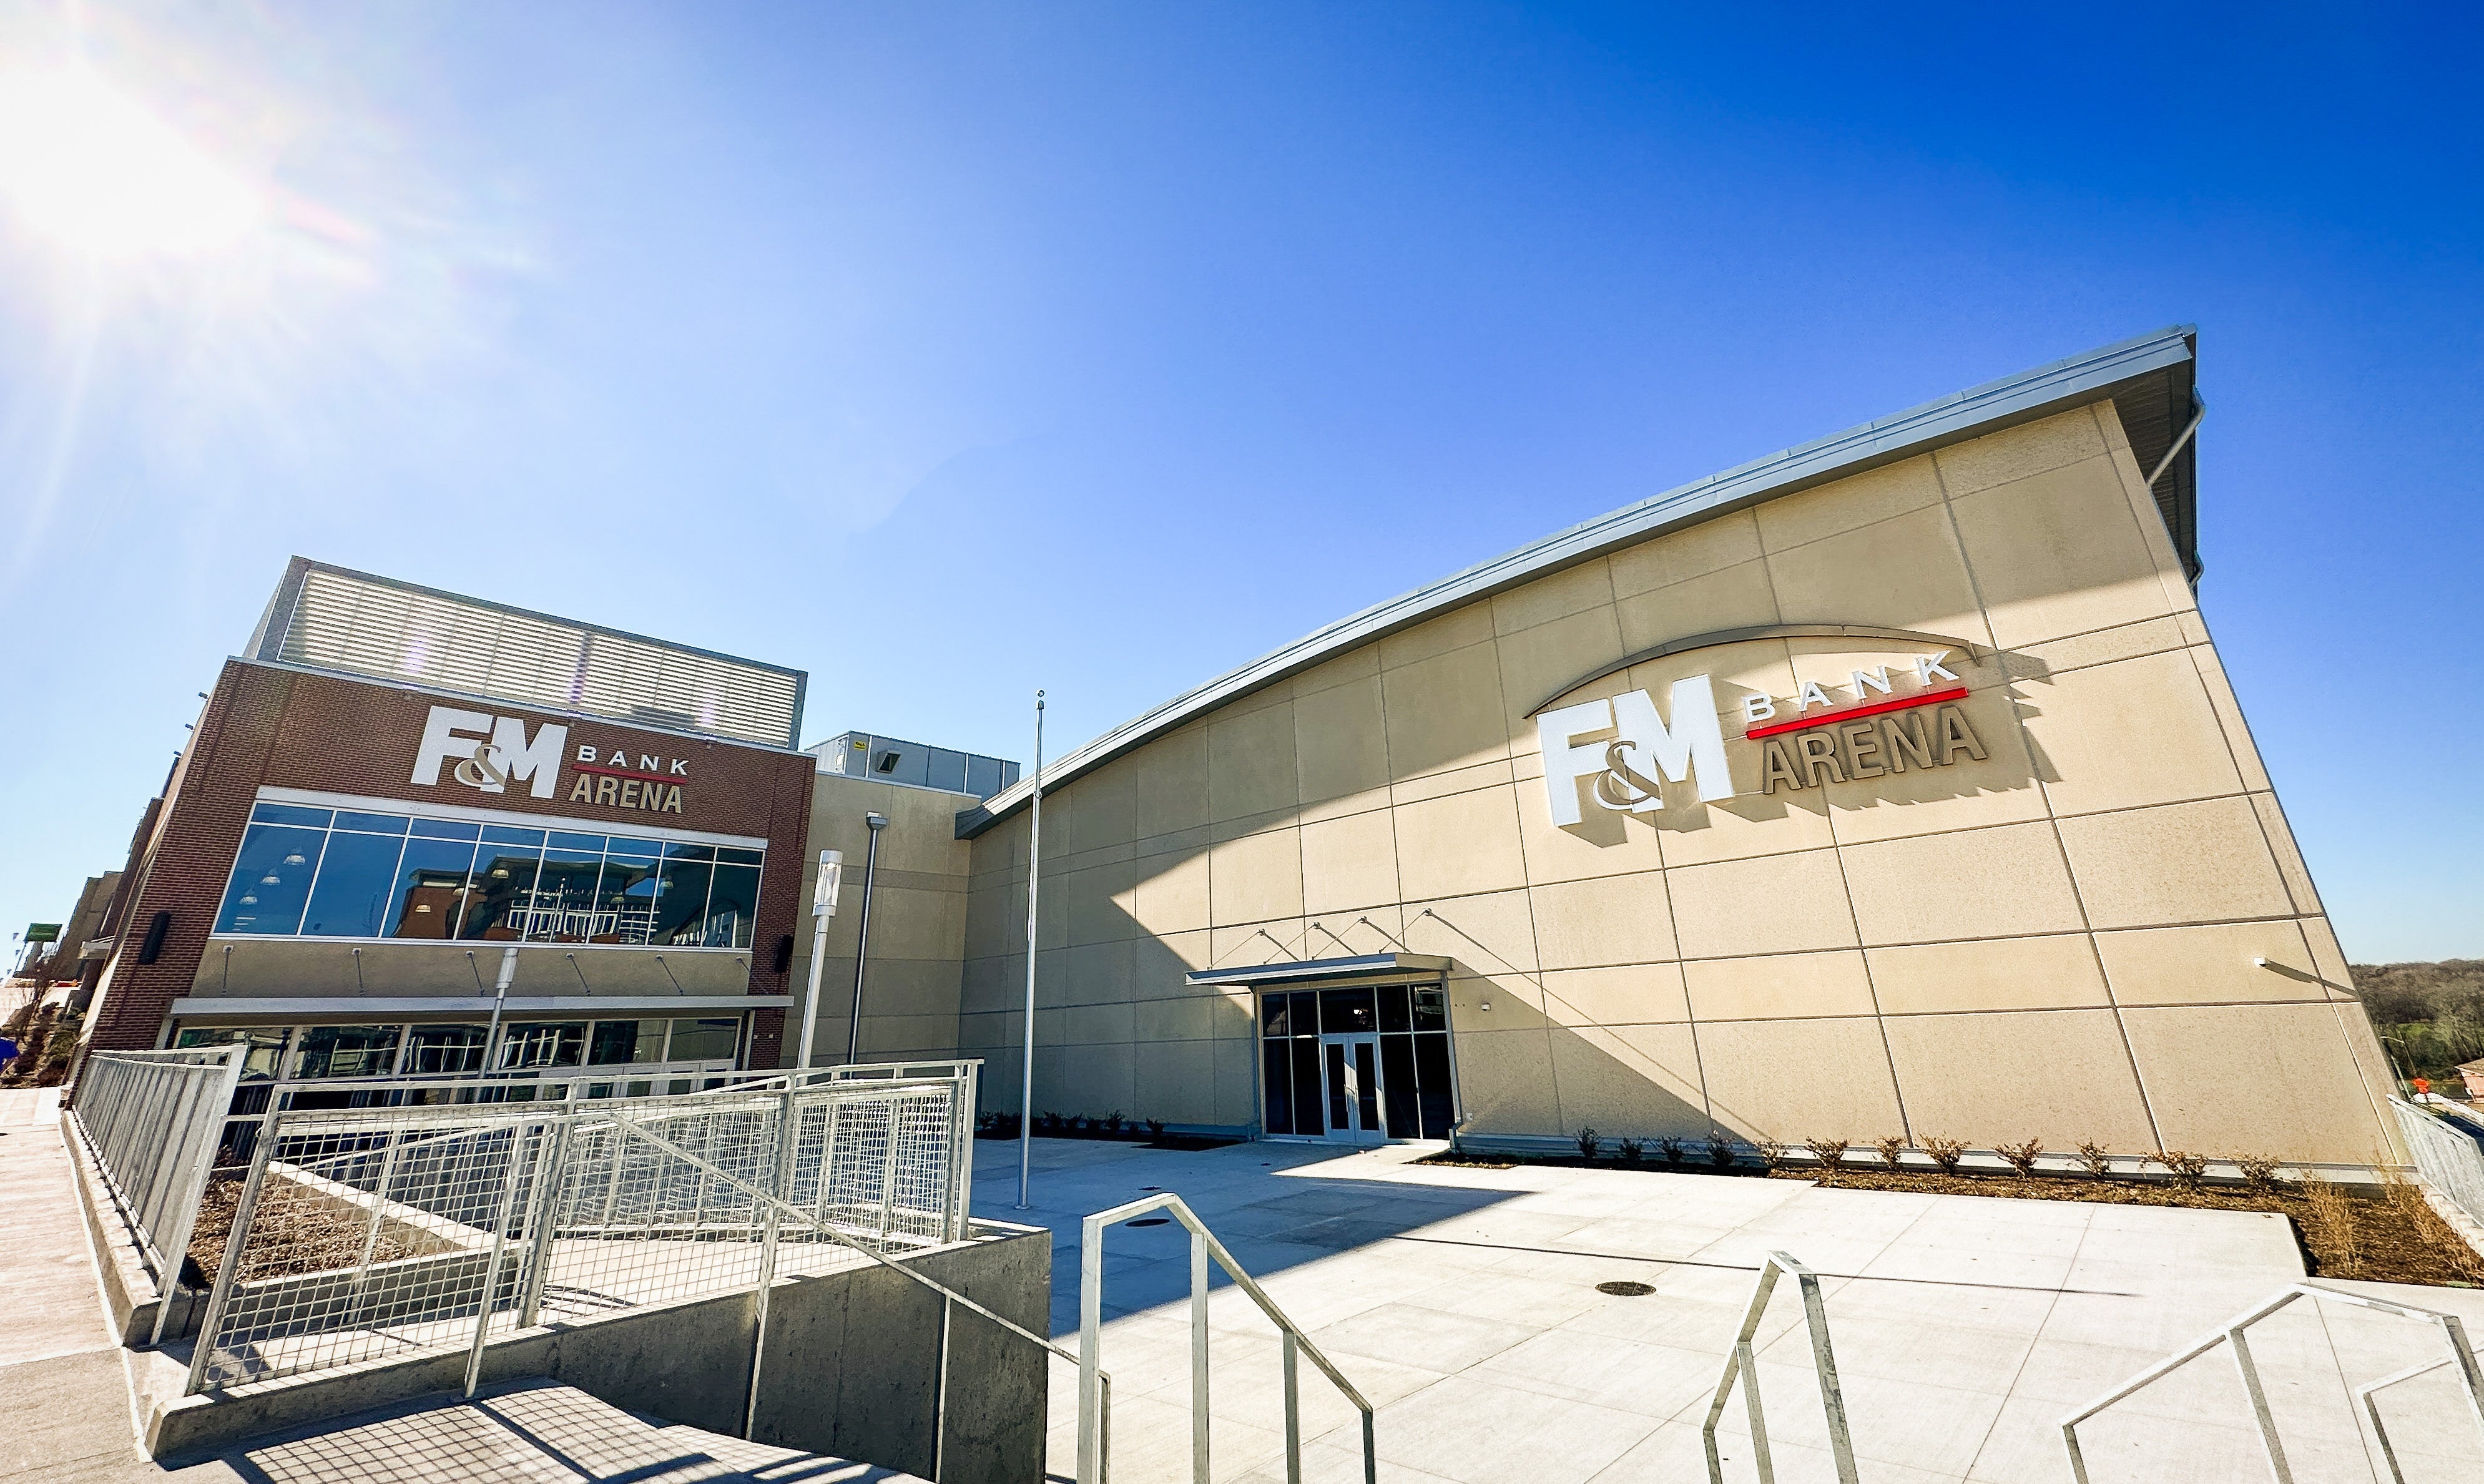 More Info for Sodexo Live! Selected As Hospitality Partner for New F&M Bank Arena